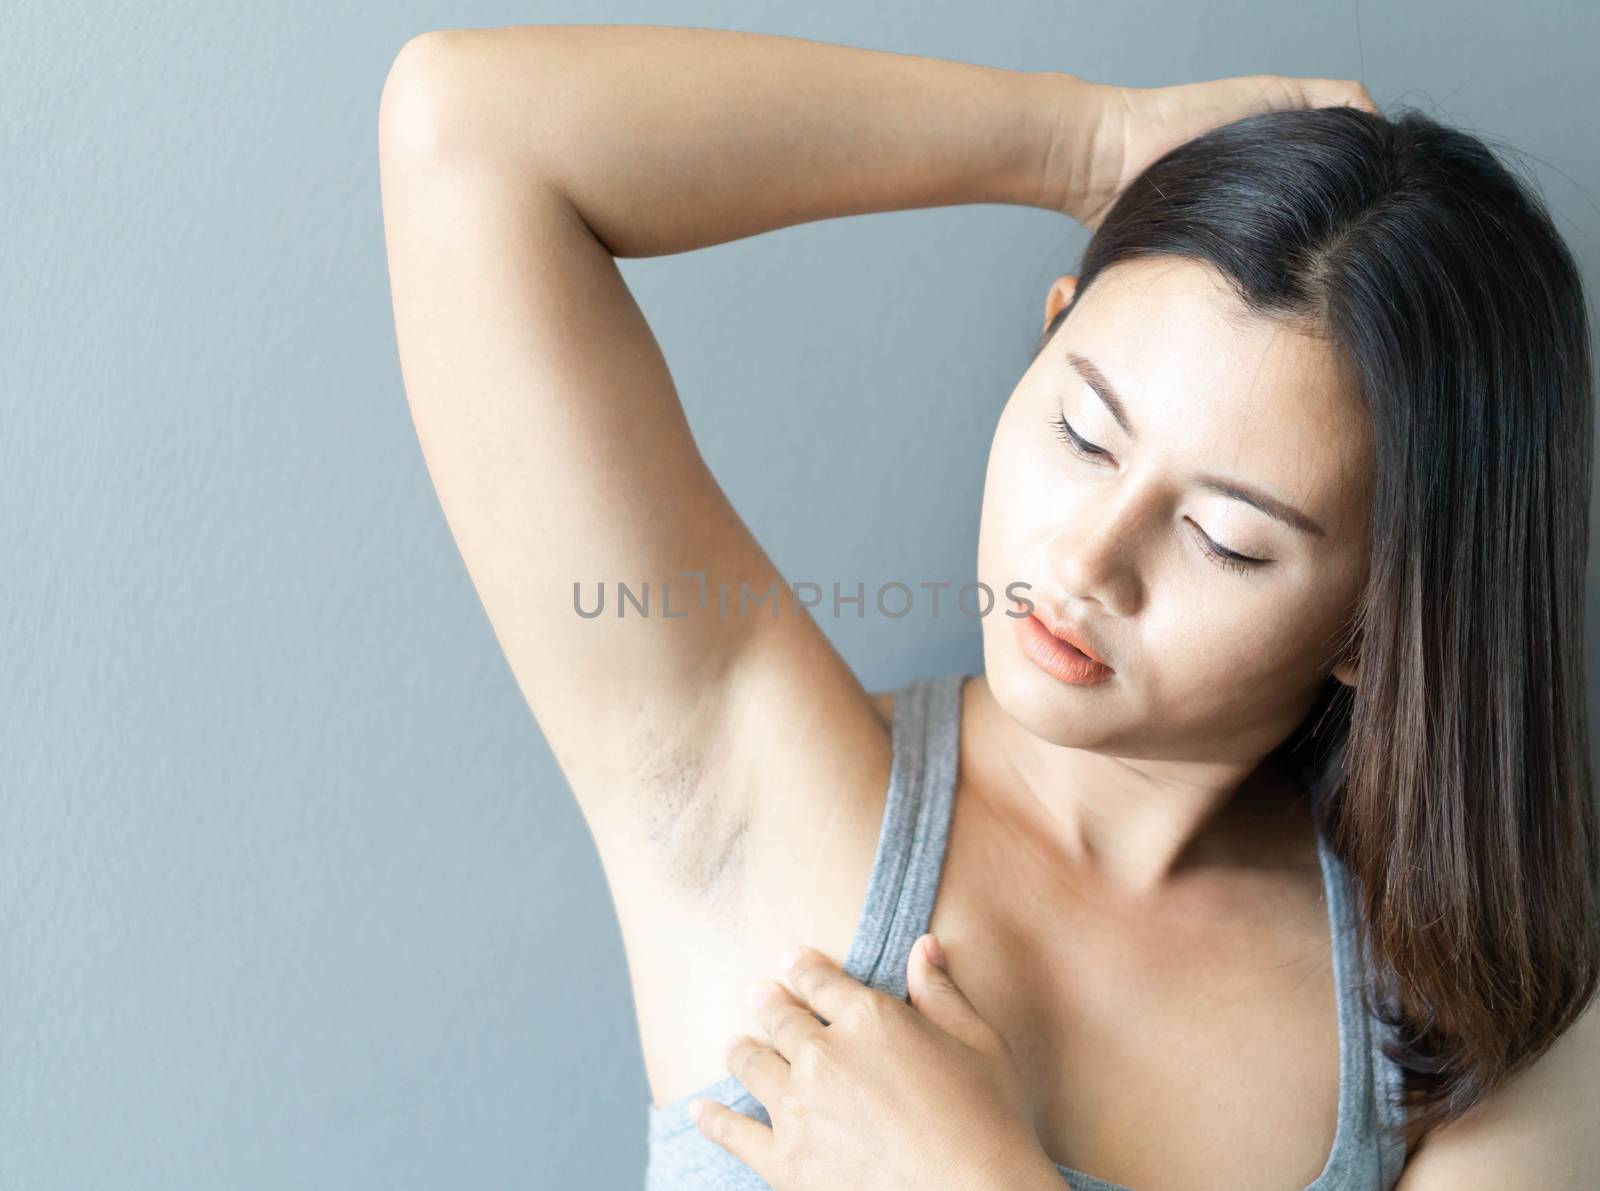 Women problem black armpit with grey background for skin care and beauty concept, selective focus